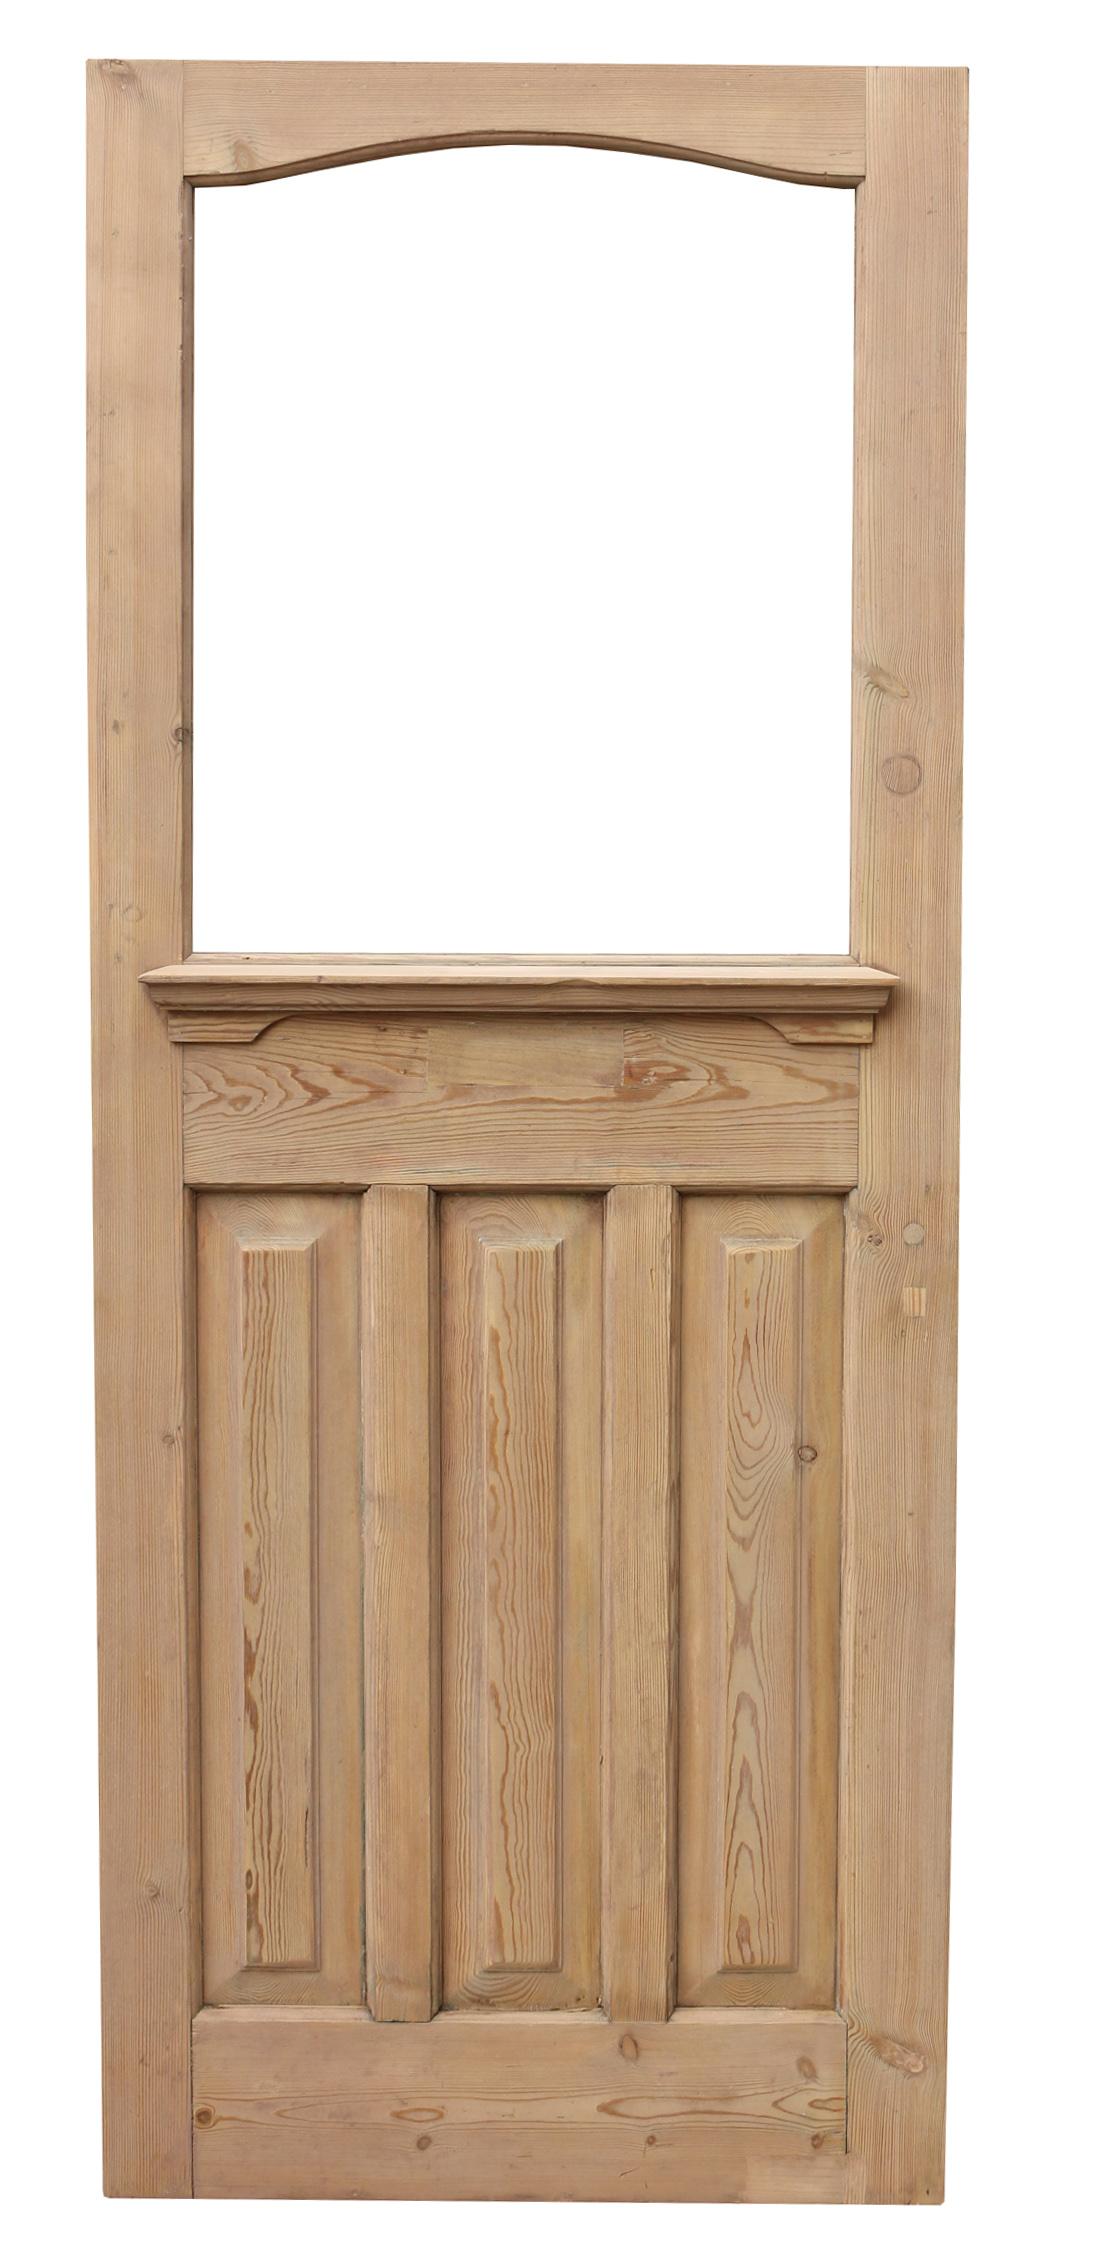 A reclaimed Art Deco style front door for glazing.